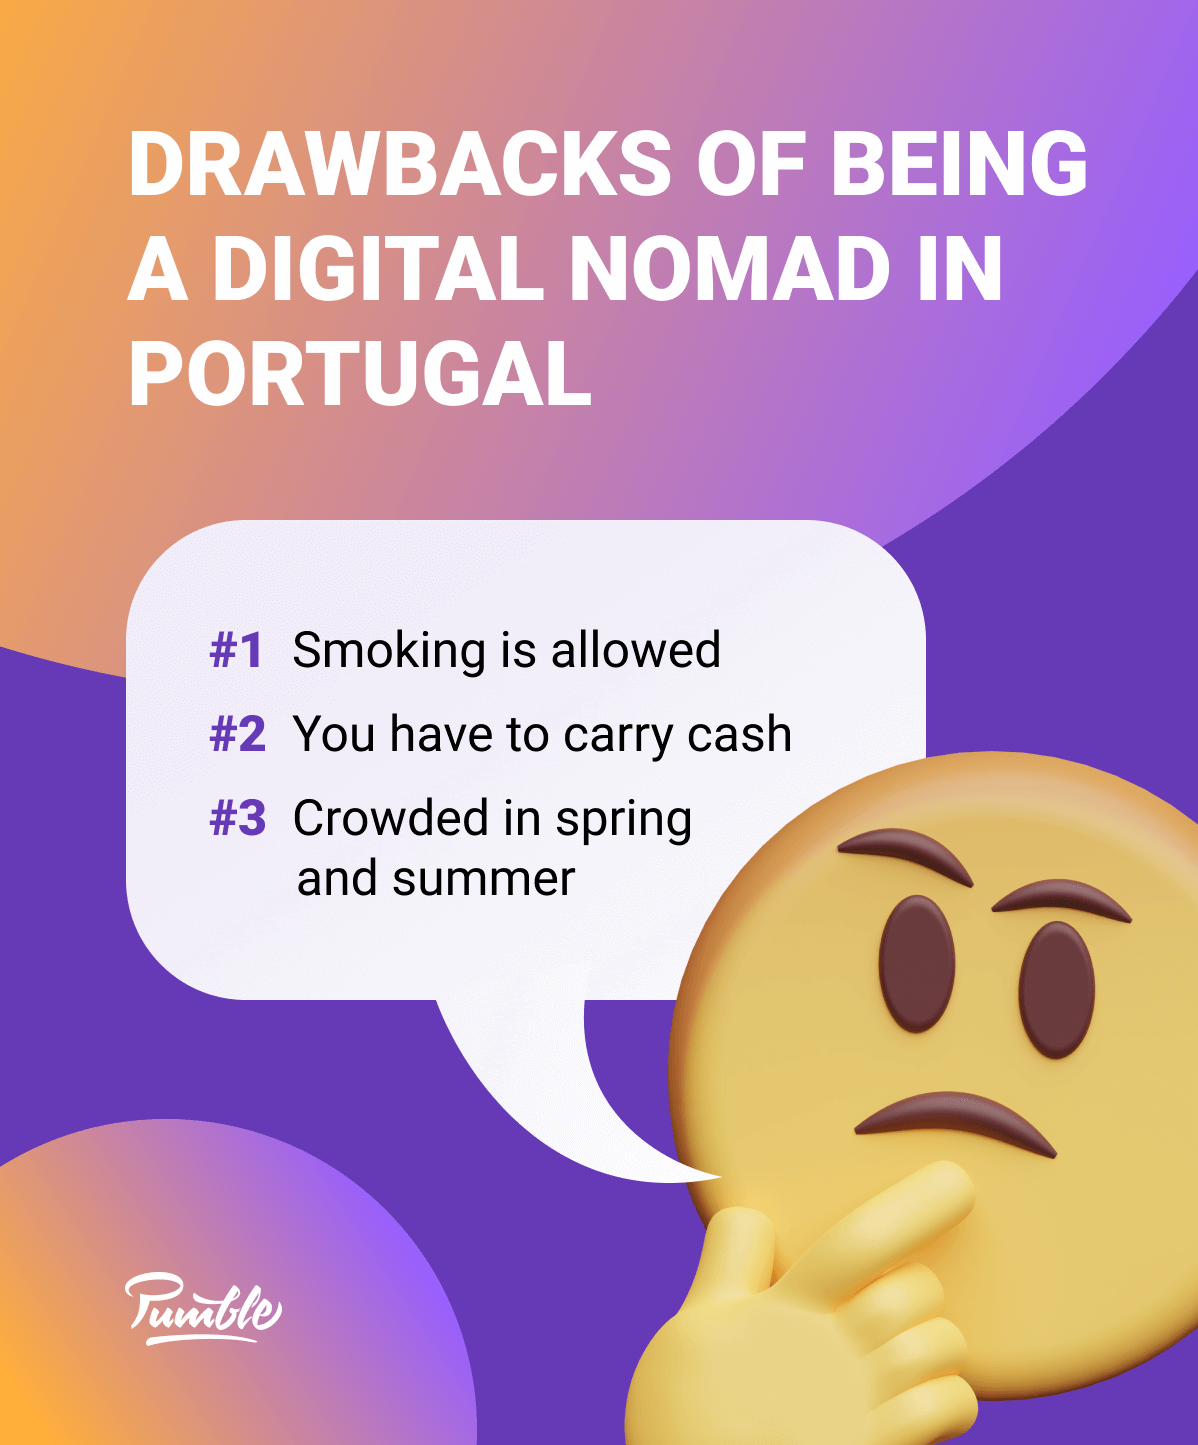 Drawbacks of being a digital nomad in Portugal